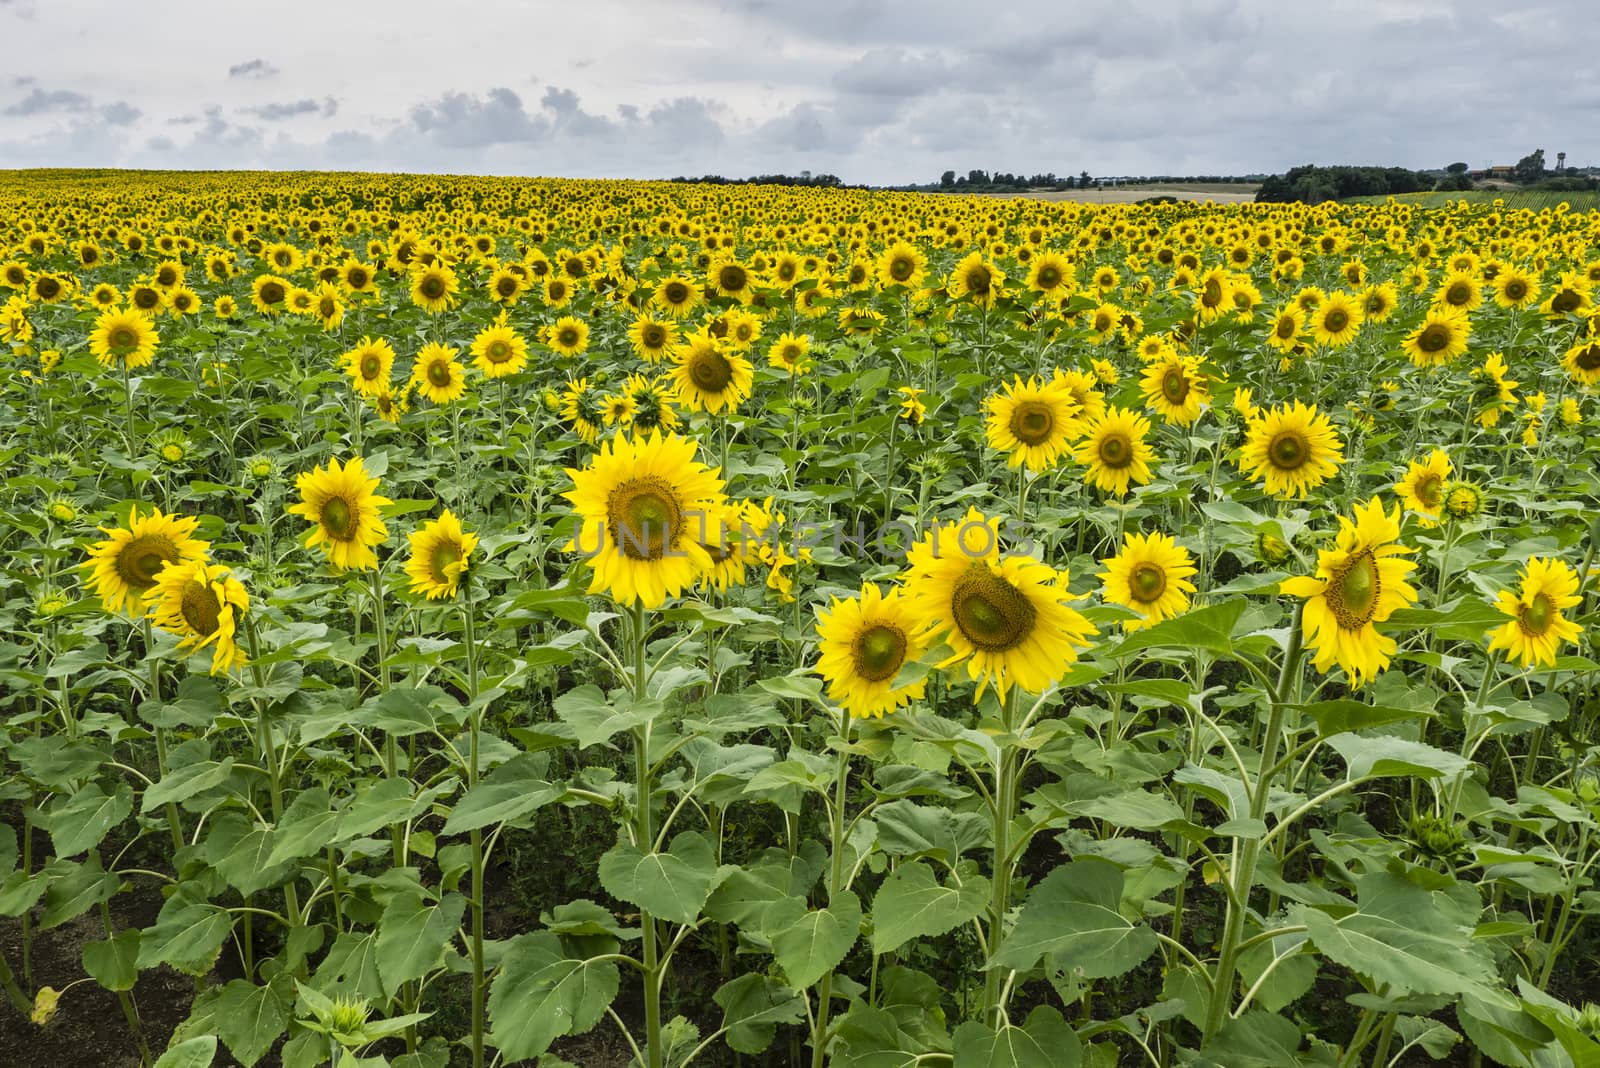 Field of sunflowers in full bloom by AlessandroZocc